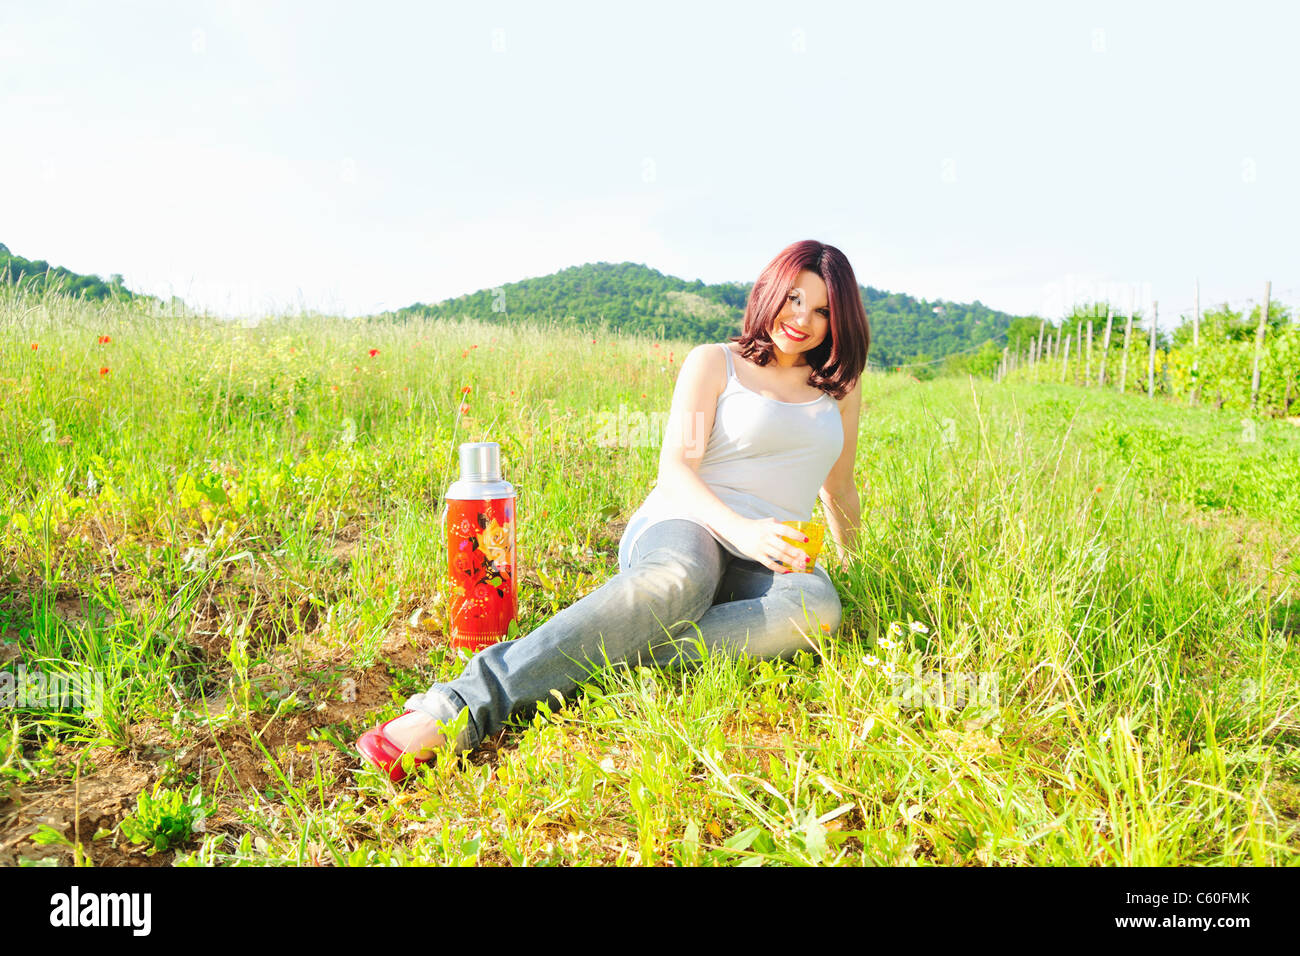 Woman drinking from thermos in field Stock Photo